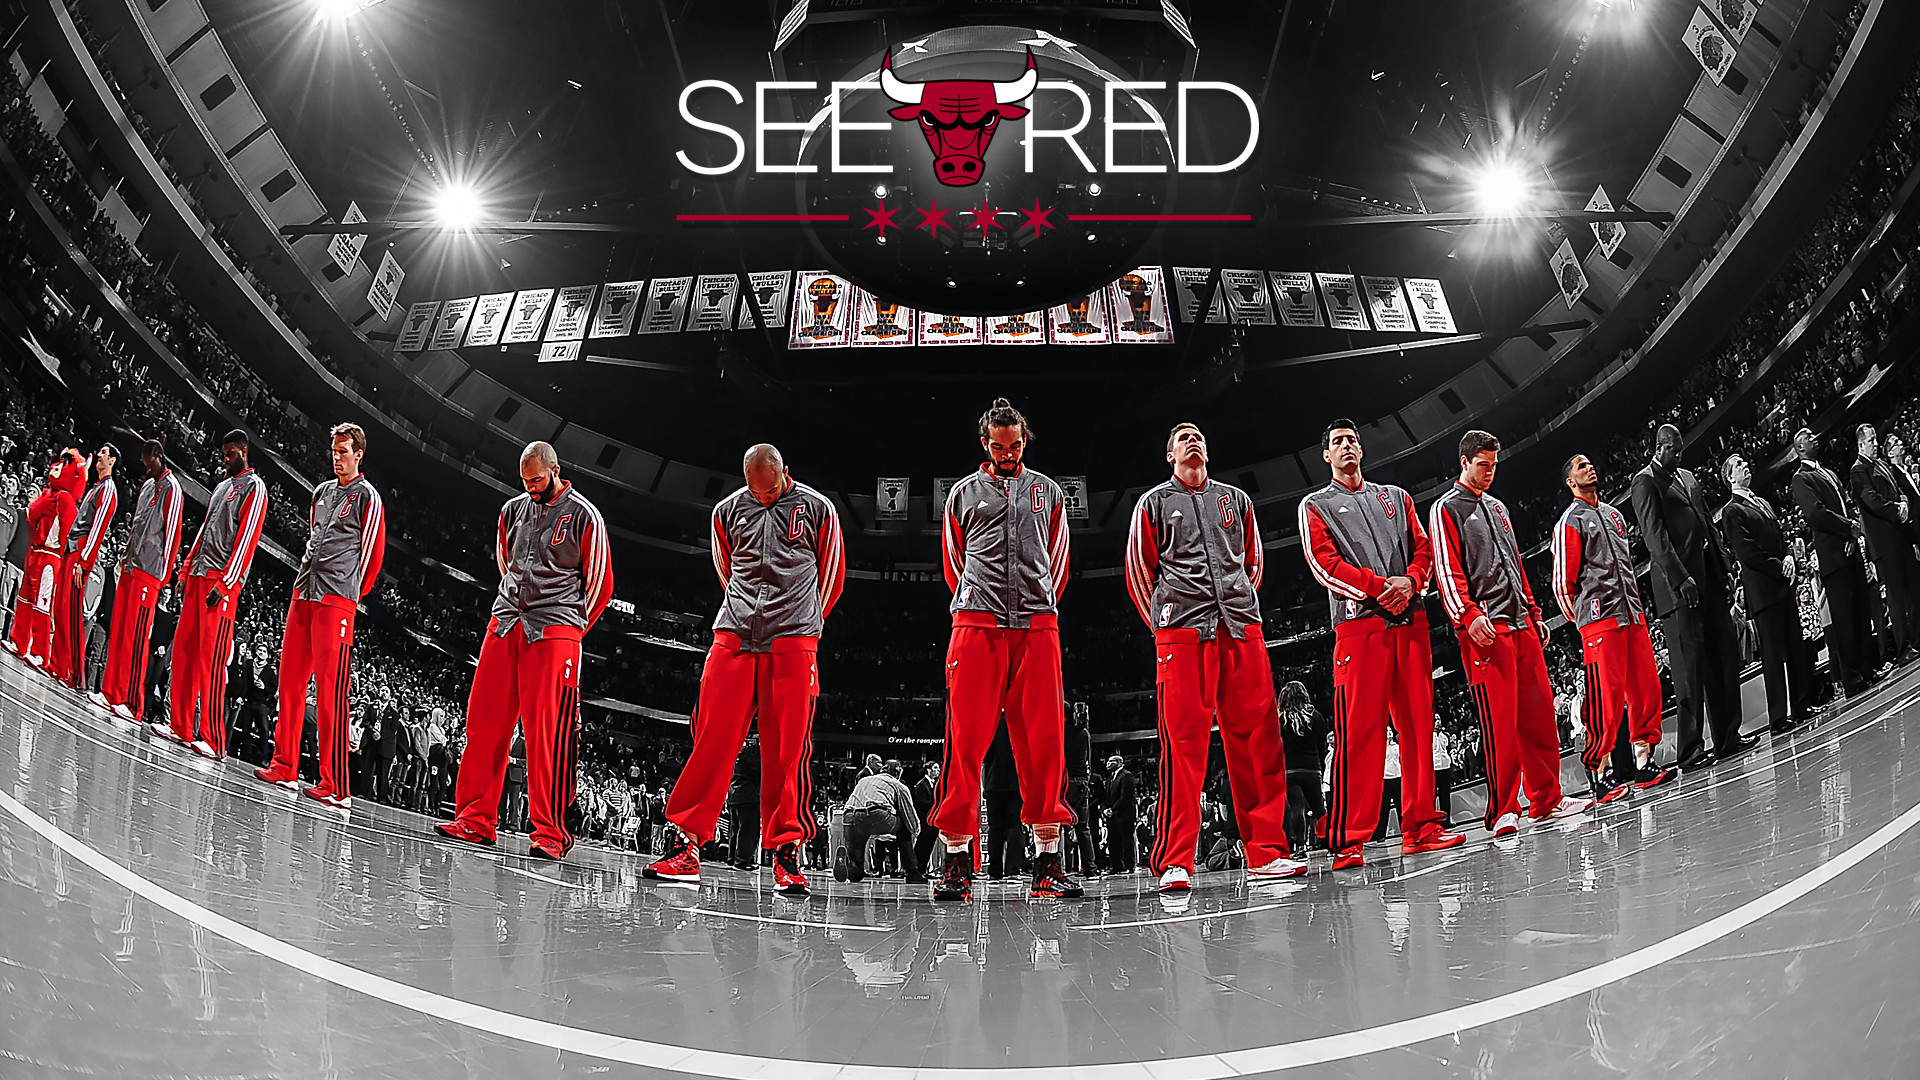 1920x1080 Chicago Bulls Beats of the East by RealZBStudios on DeviantArt 2015 See Red  Wallpaper ...